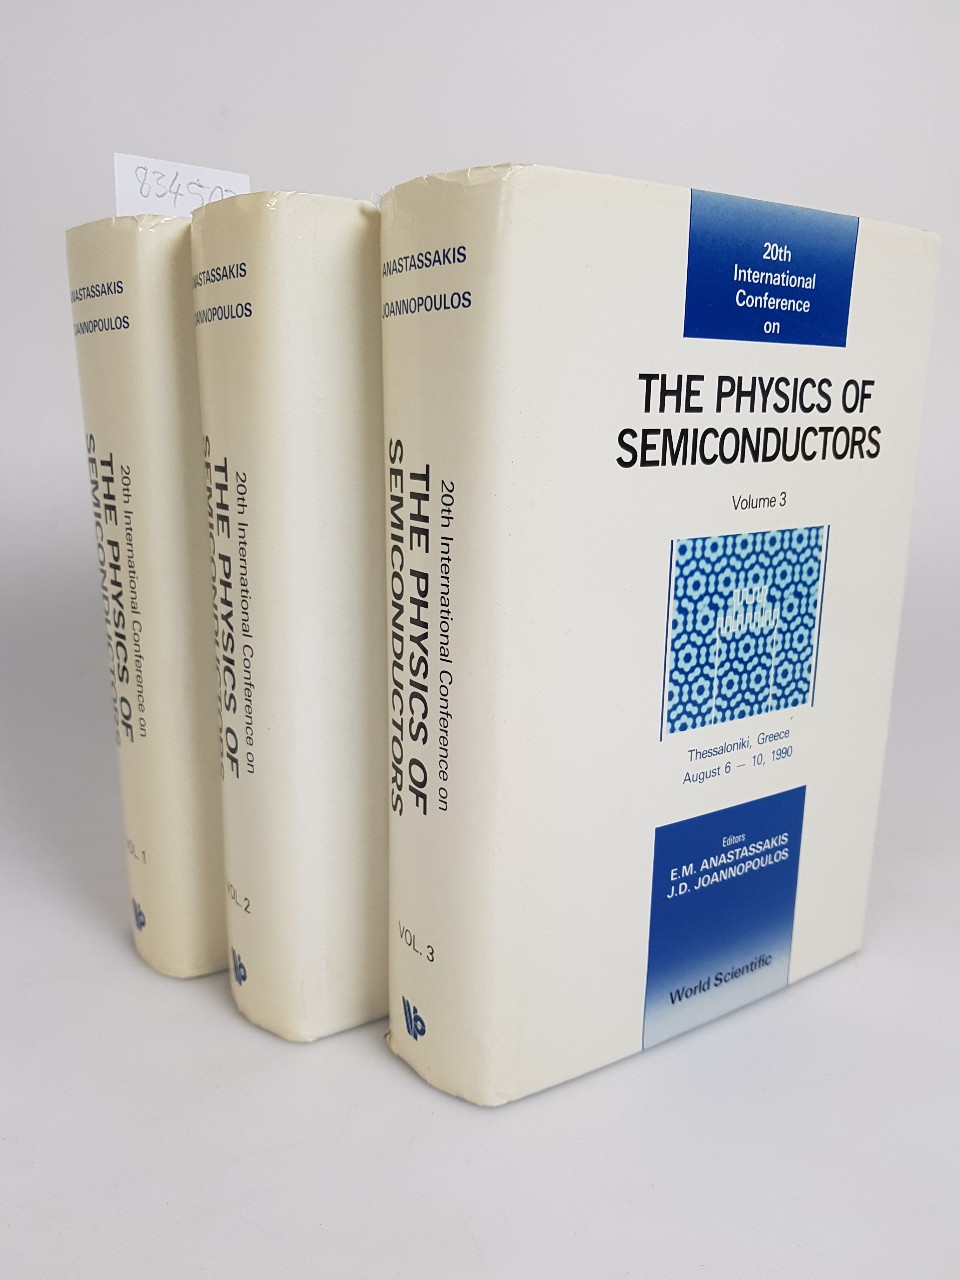 Anastassakis, E. M. and J. D. Joannopoulos (Eds.):  20th International Conference on The Physics of Semiconductors (Thessaloniki, Greece, August 6 - 10, 1990): Vol. 1-3. 